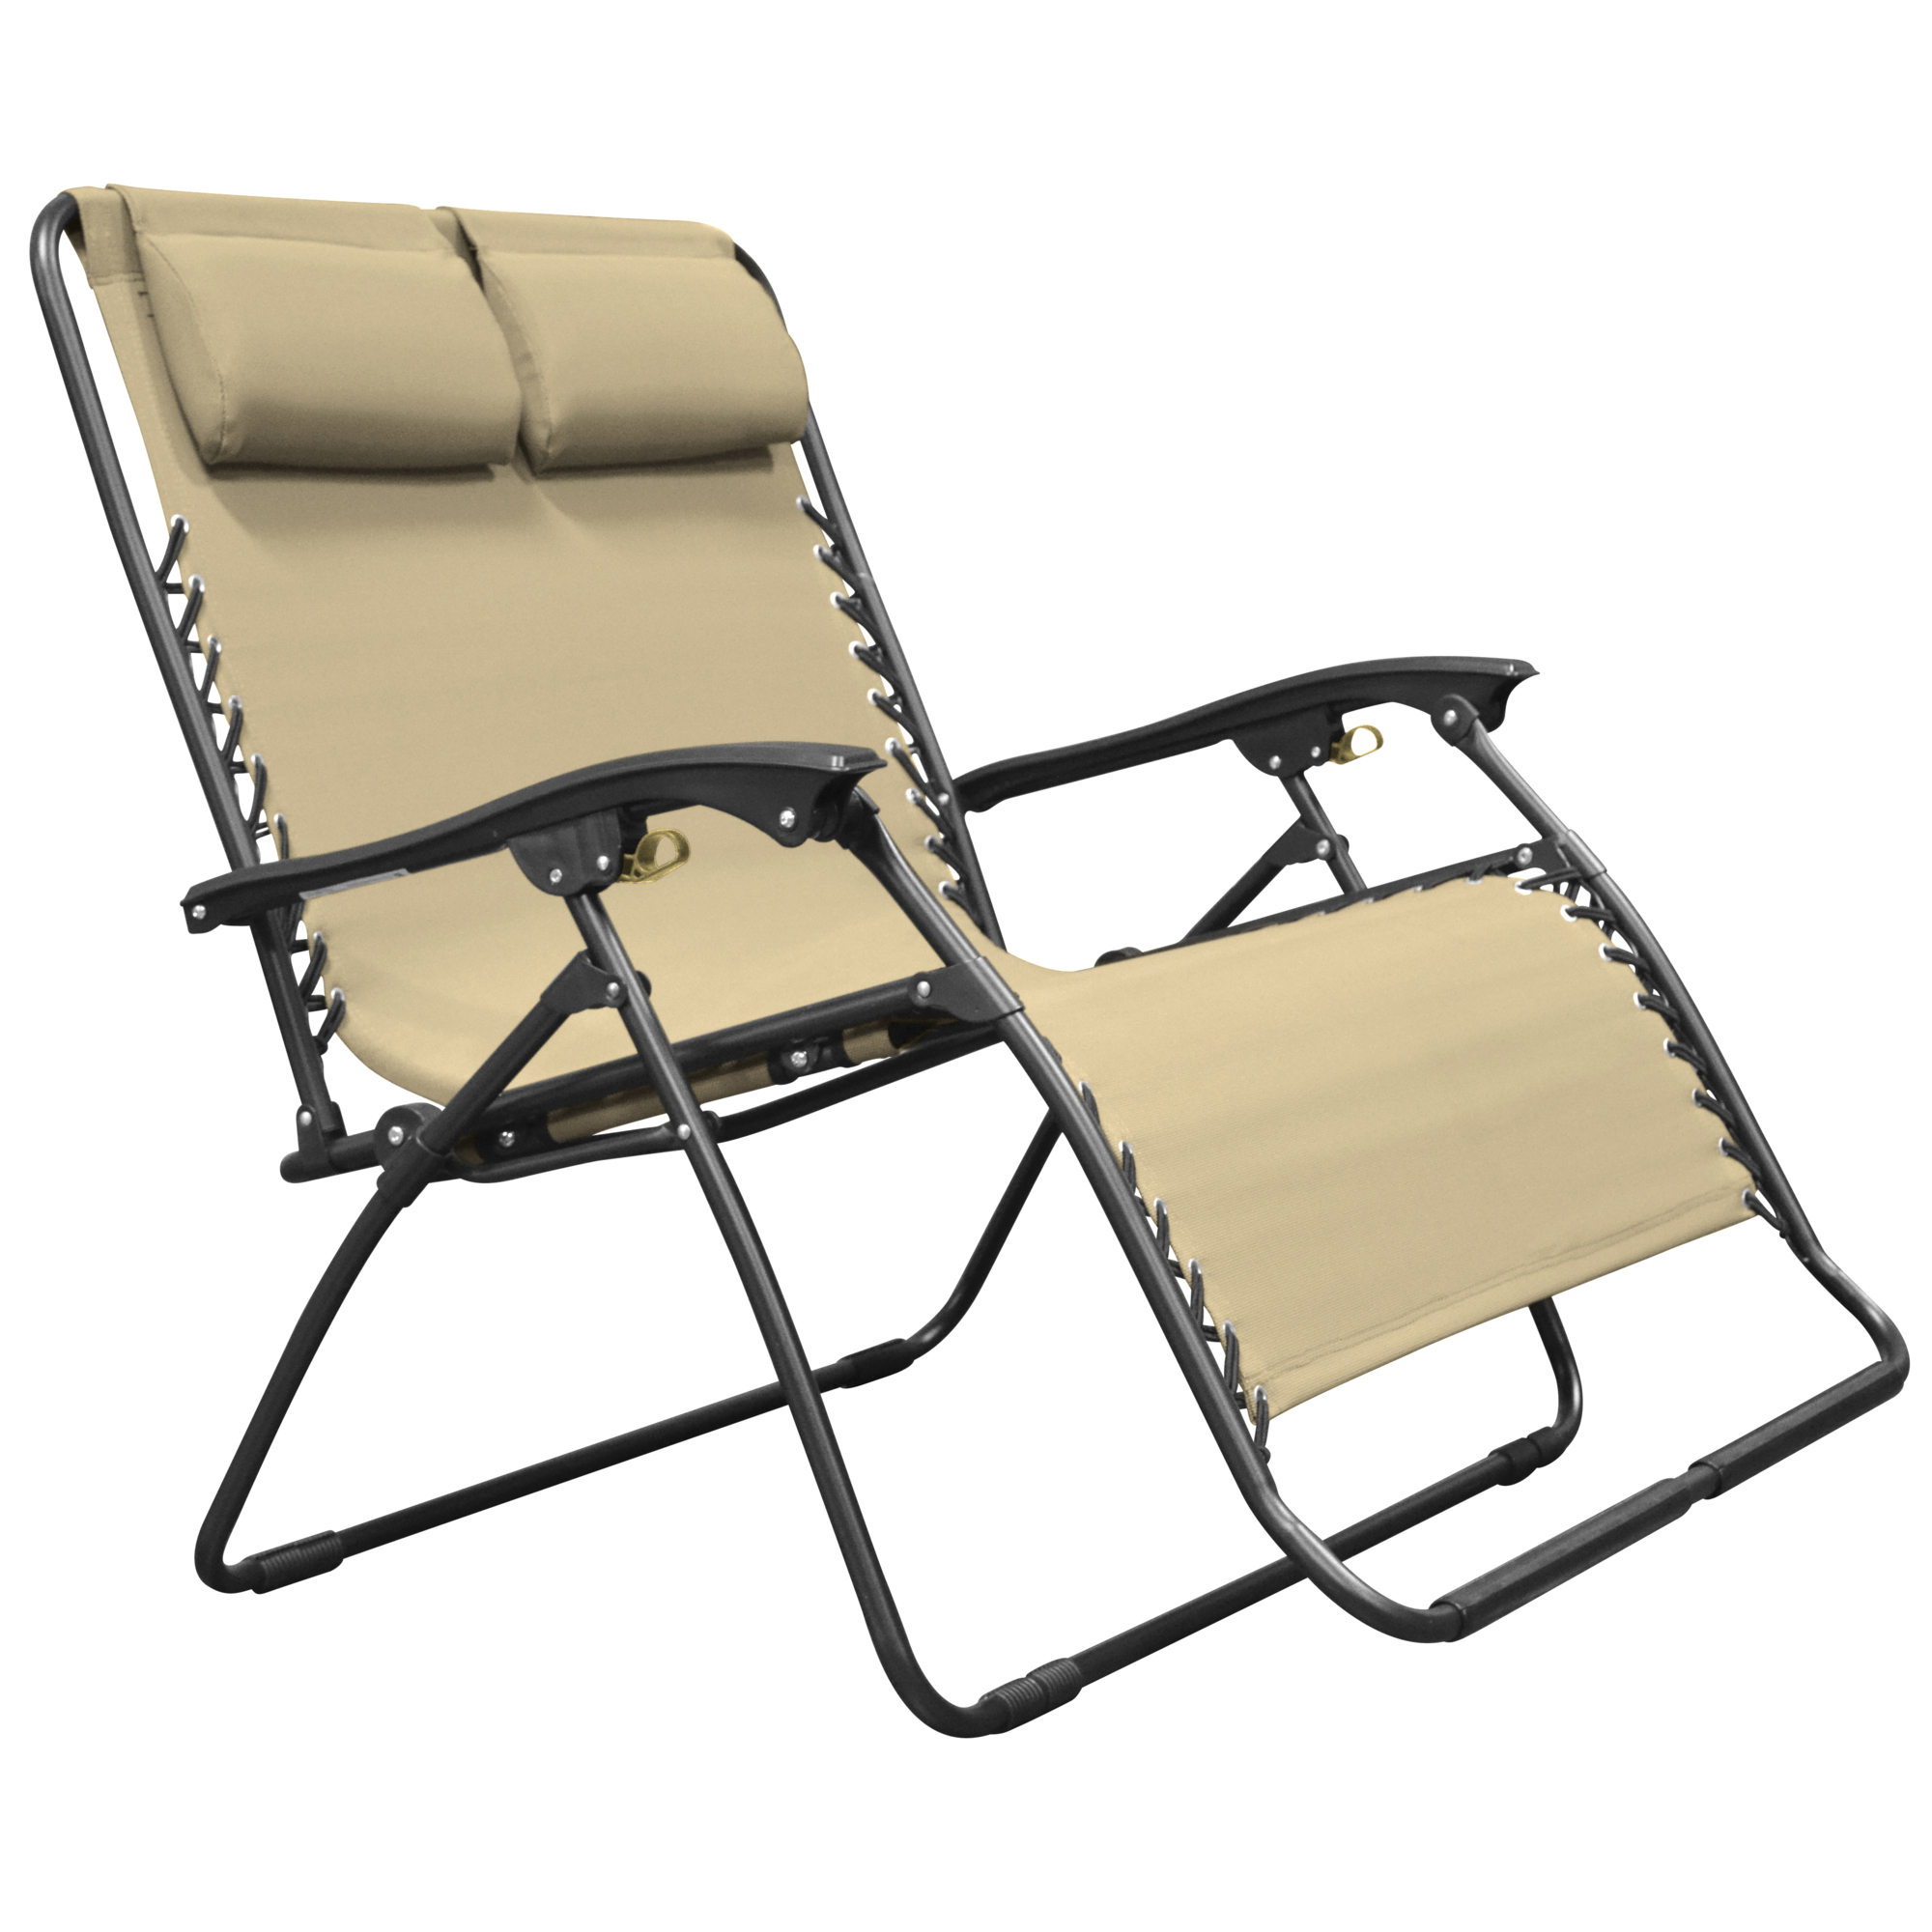 Caravan Canopy, Infinity loveSeat Zero Gravity Chair Lounger, Primary Color Beige, Material Textile, Width 42.9 in, Model ZGL01151